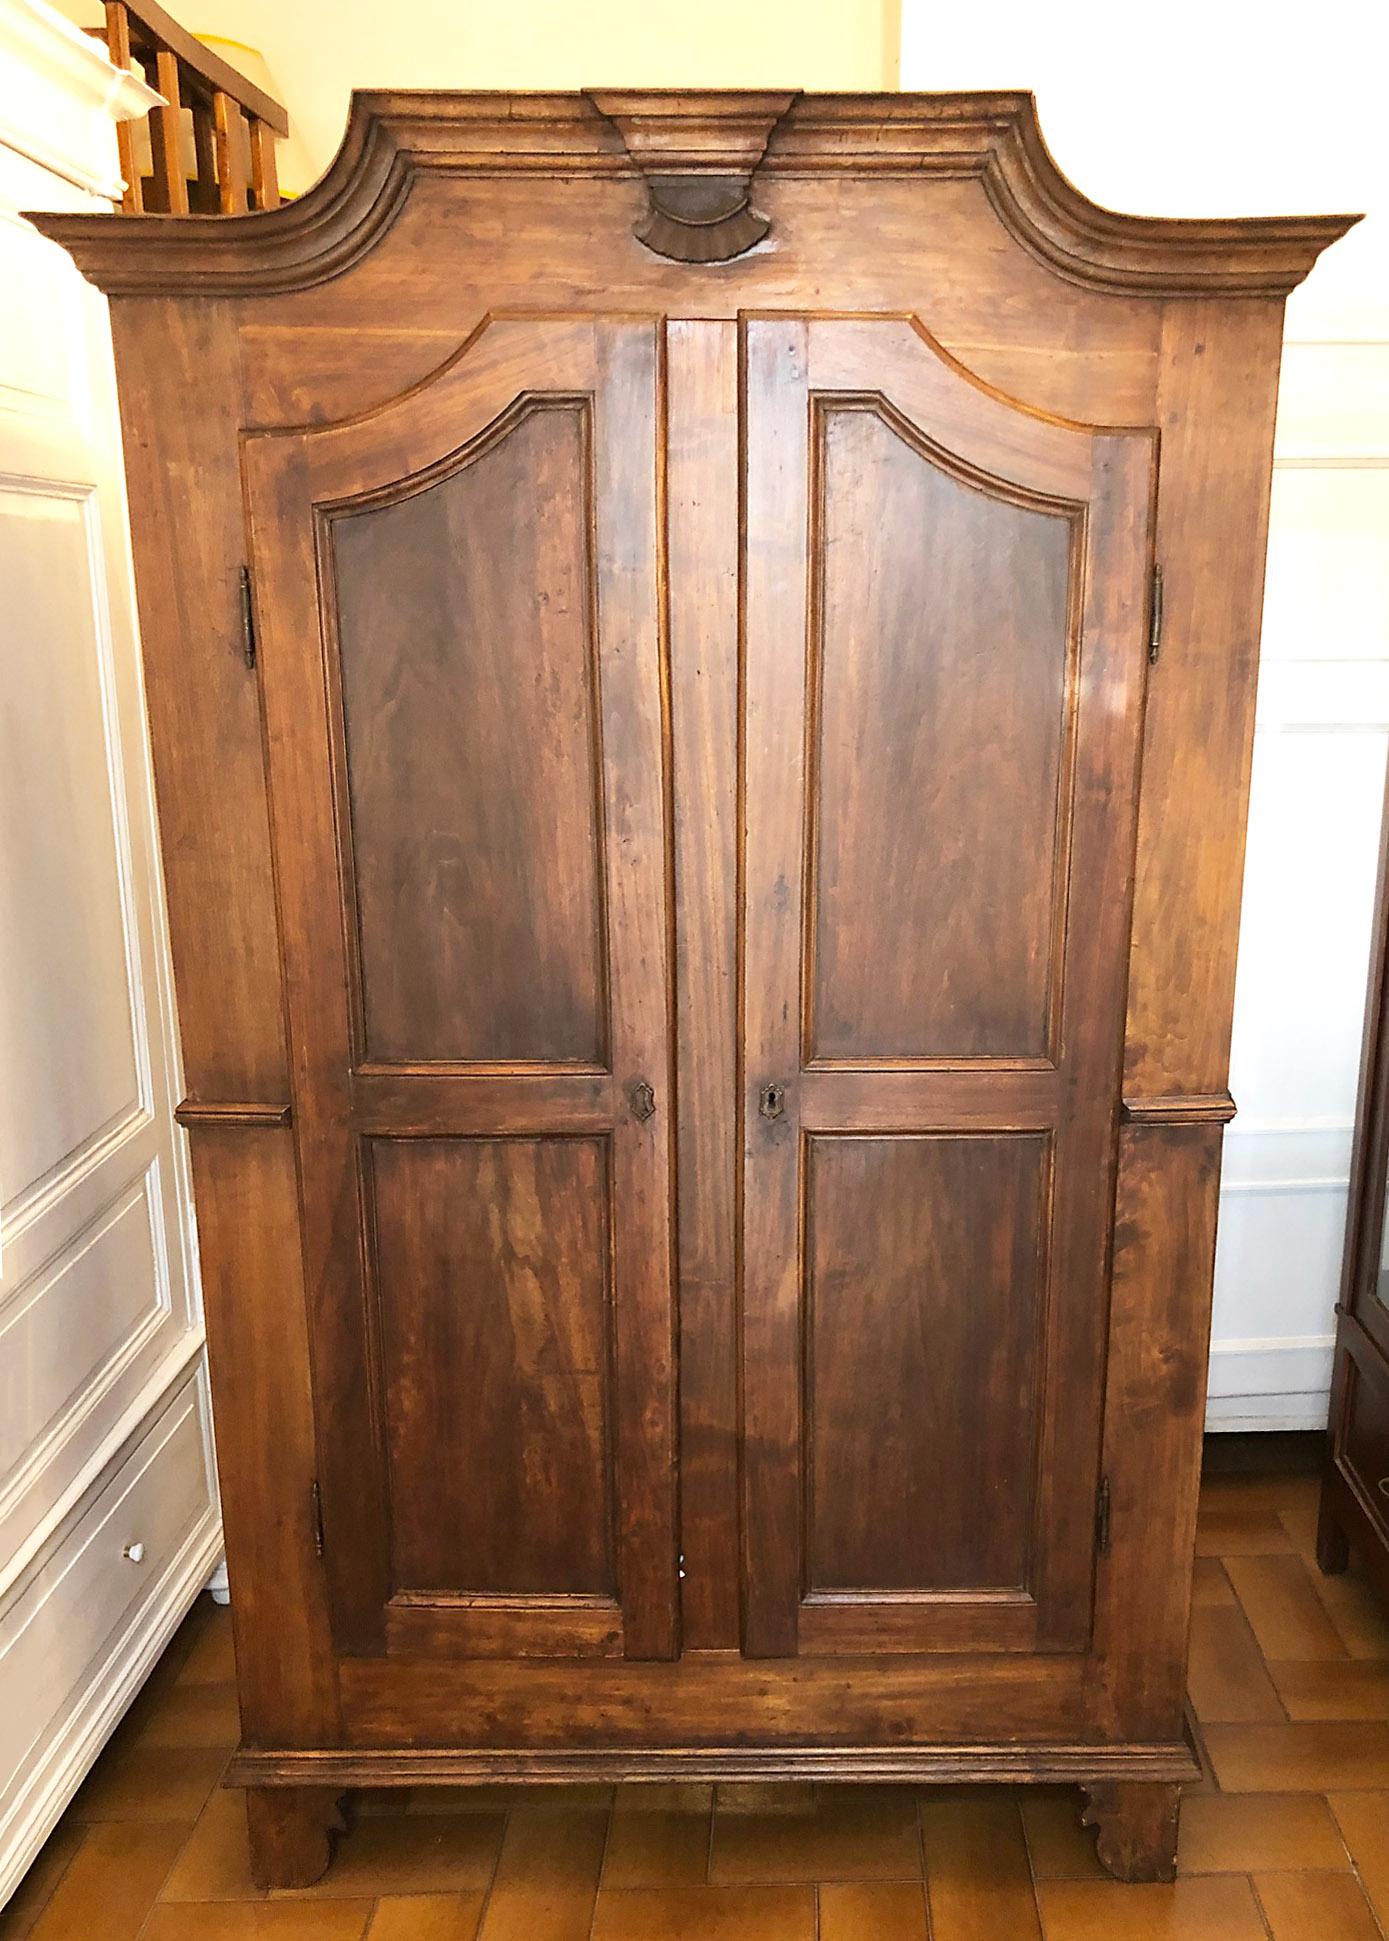 Antique Piedmontese wardrobe in poplar with two doors, original, walnut color.

The wardrobe is divided into two parts horizontally

Size cm: 128 + 12 frame x 50 x 213 height

Useful depth 43 cm.
The transport quote for the USA and Canada is